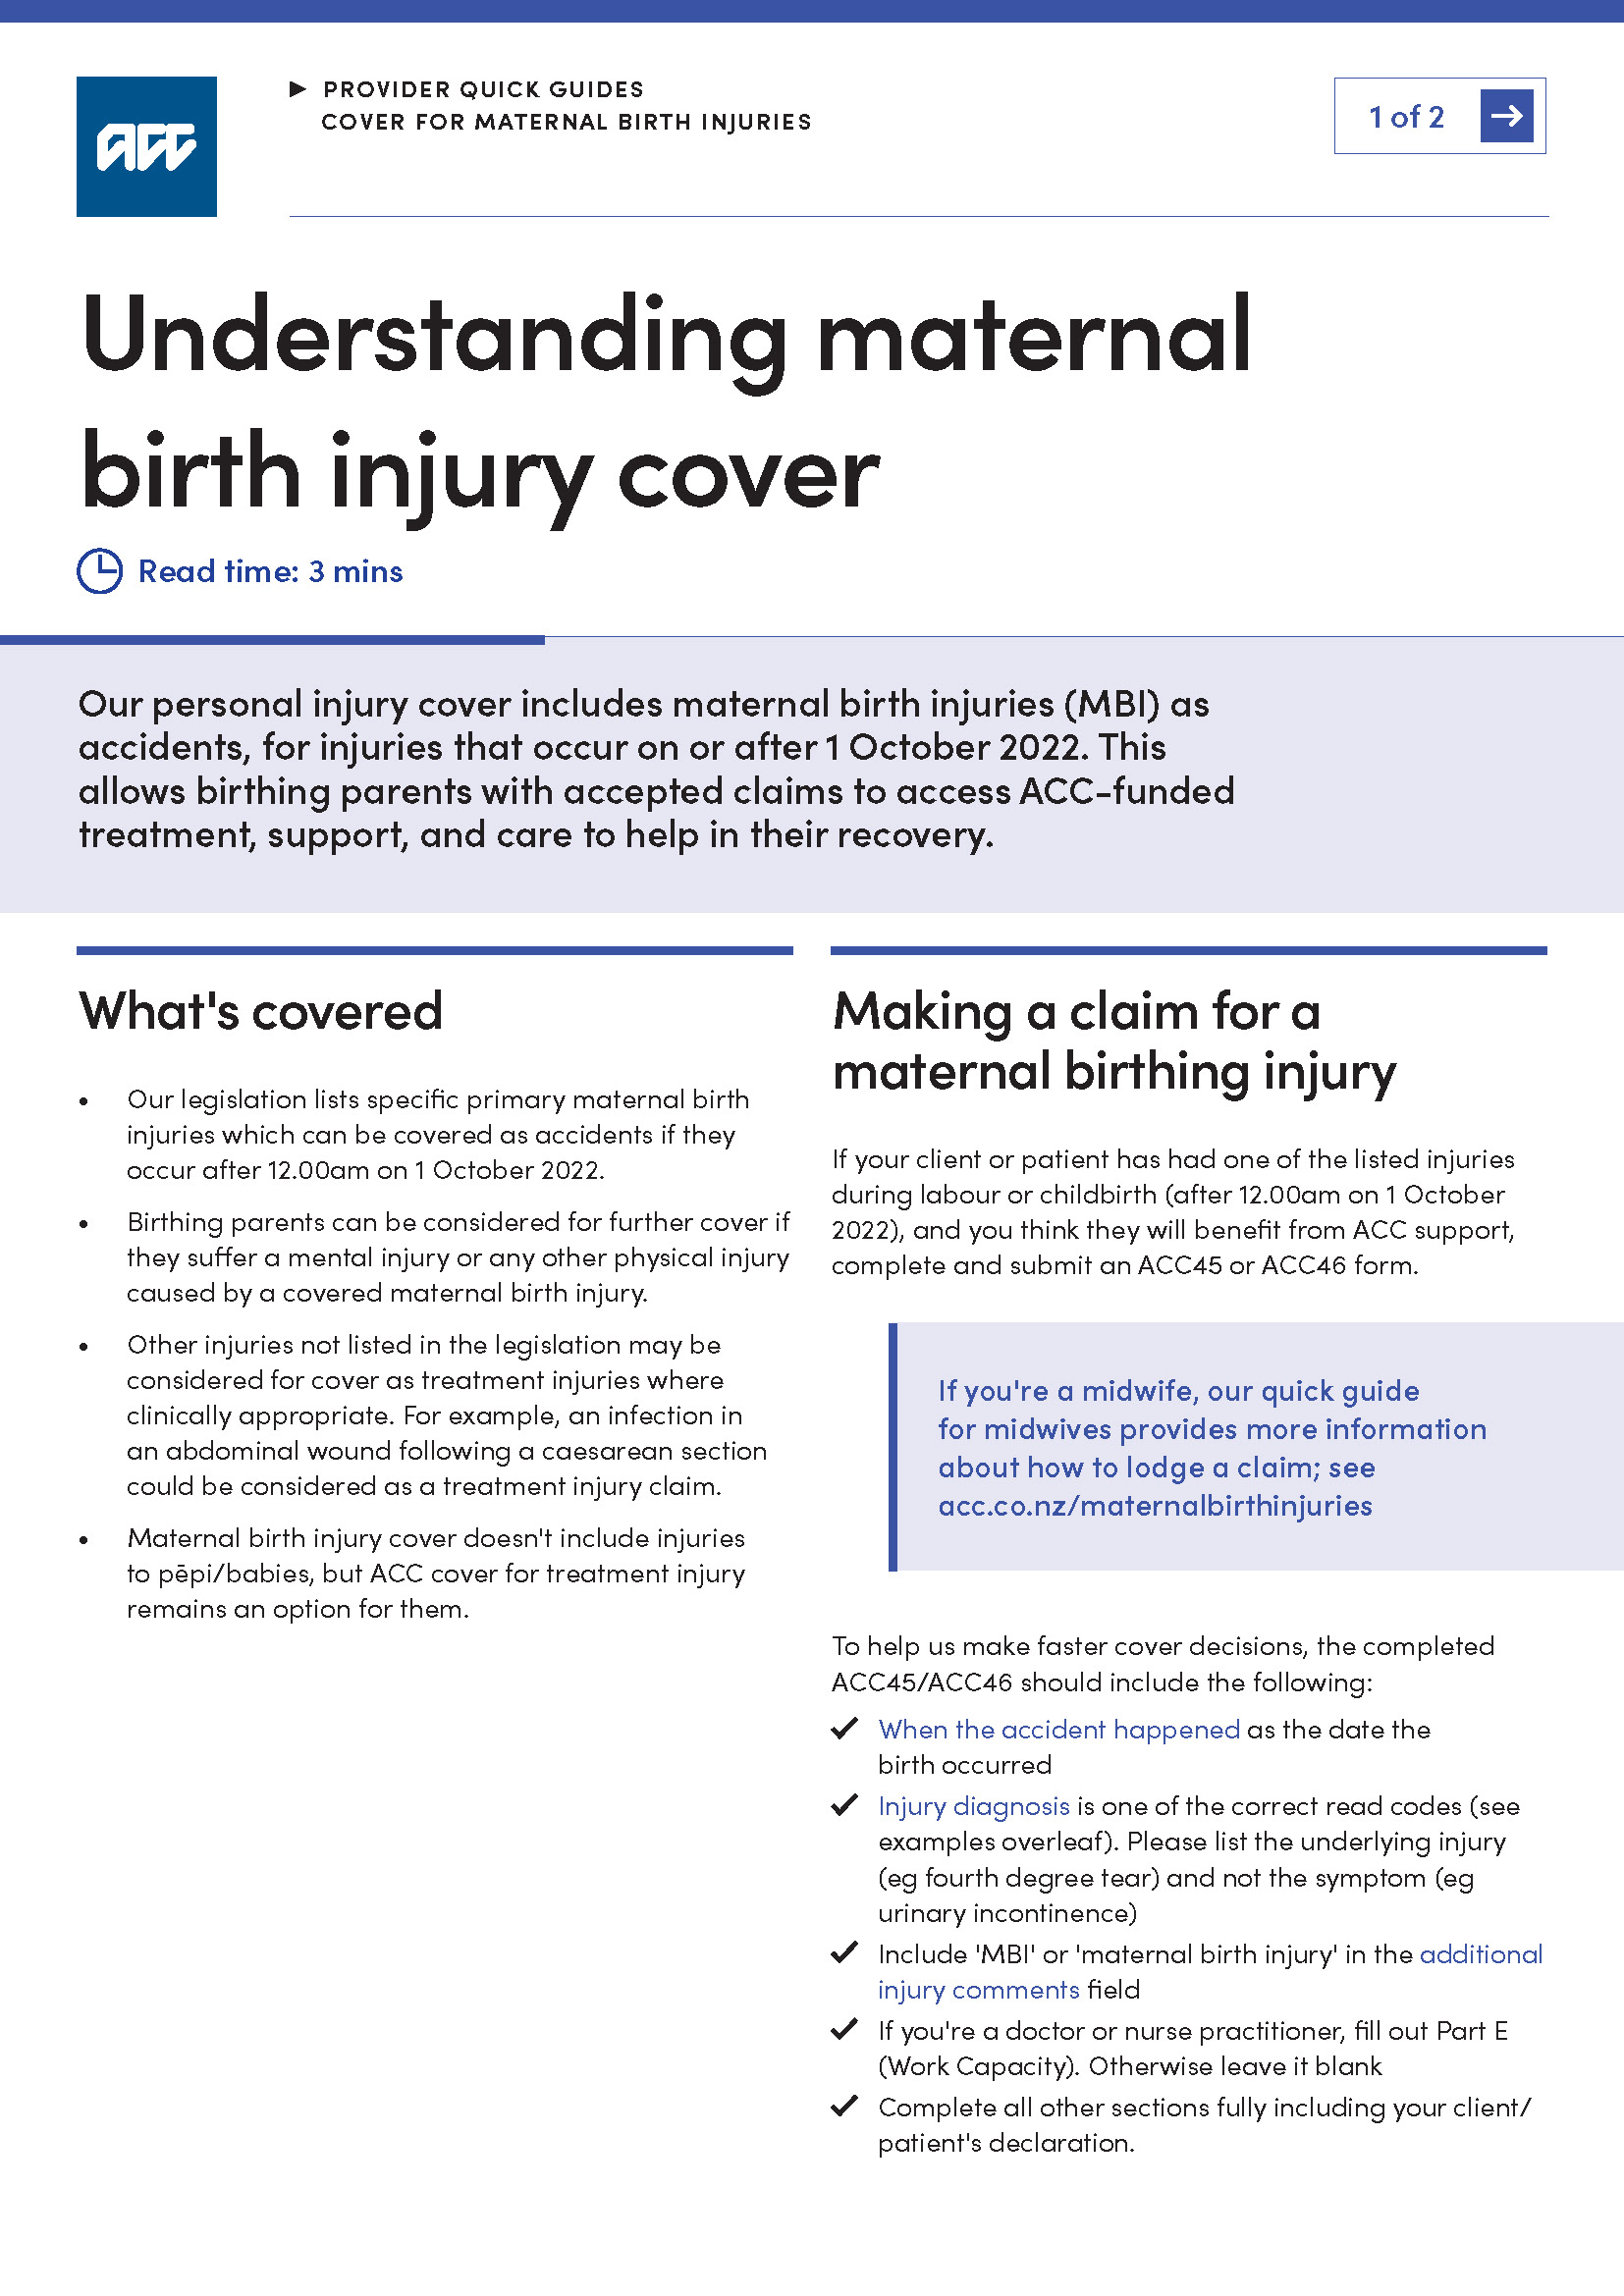 Front cover of provider maternal birth injury quick guide